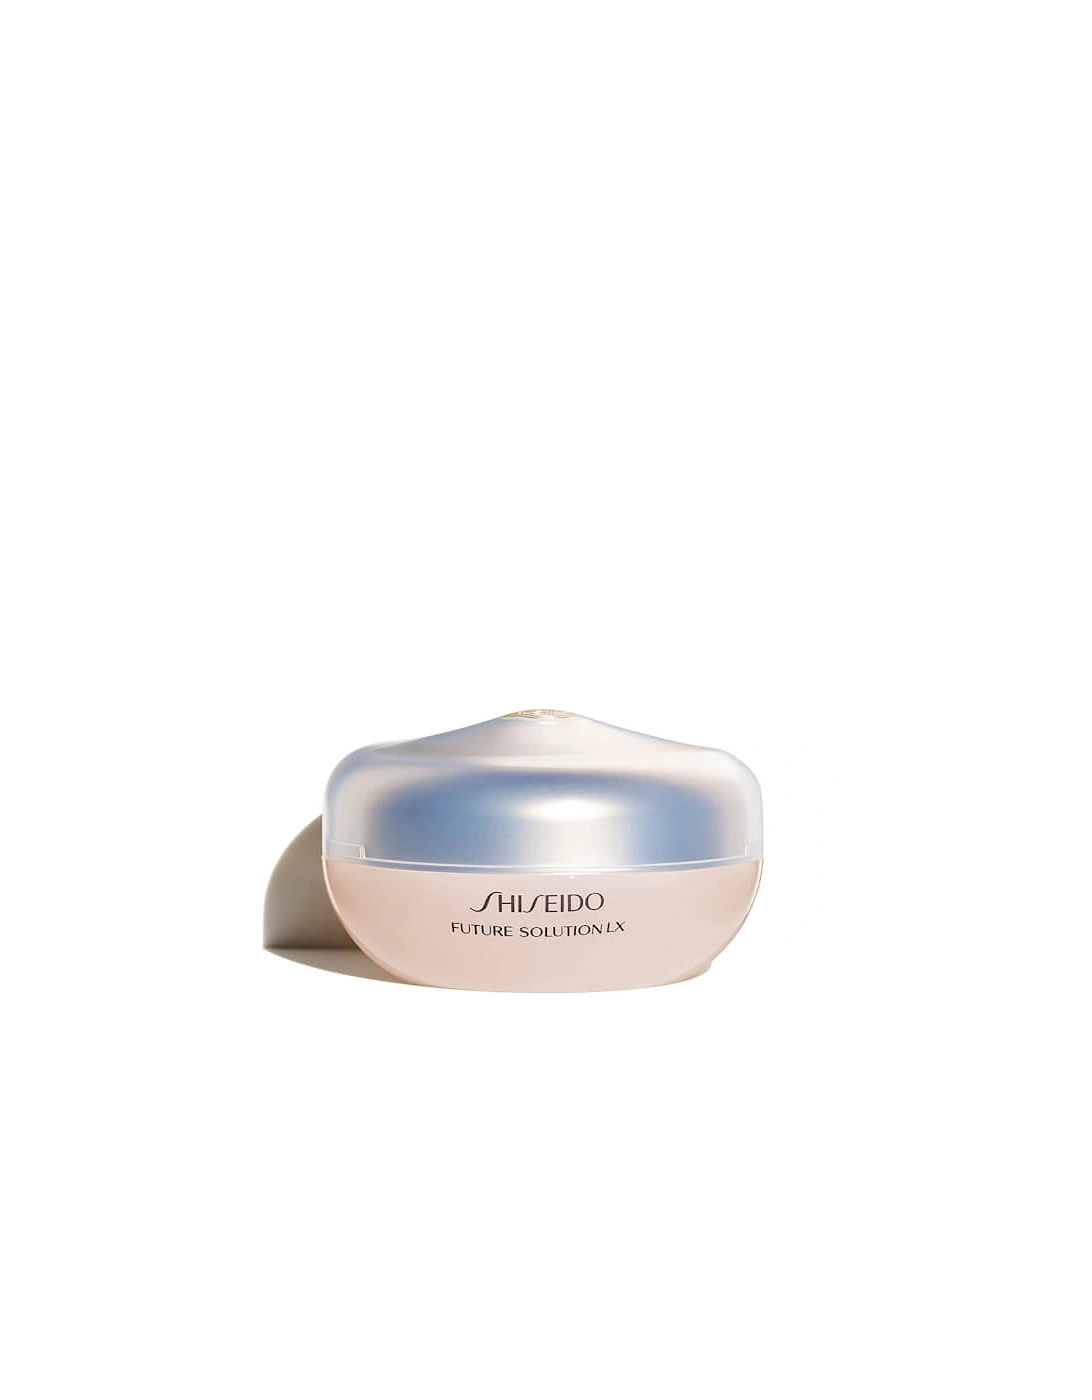 Future Solution LX Total Radiance Loose Powder - 10g - Shiseido, 2 of 1